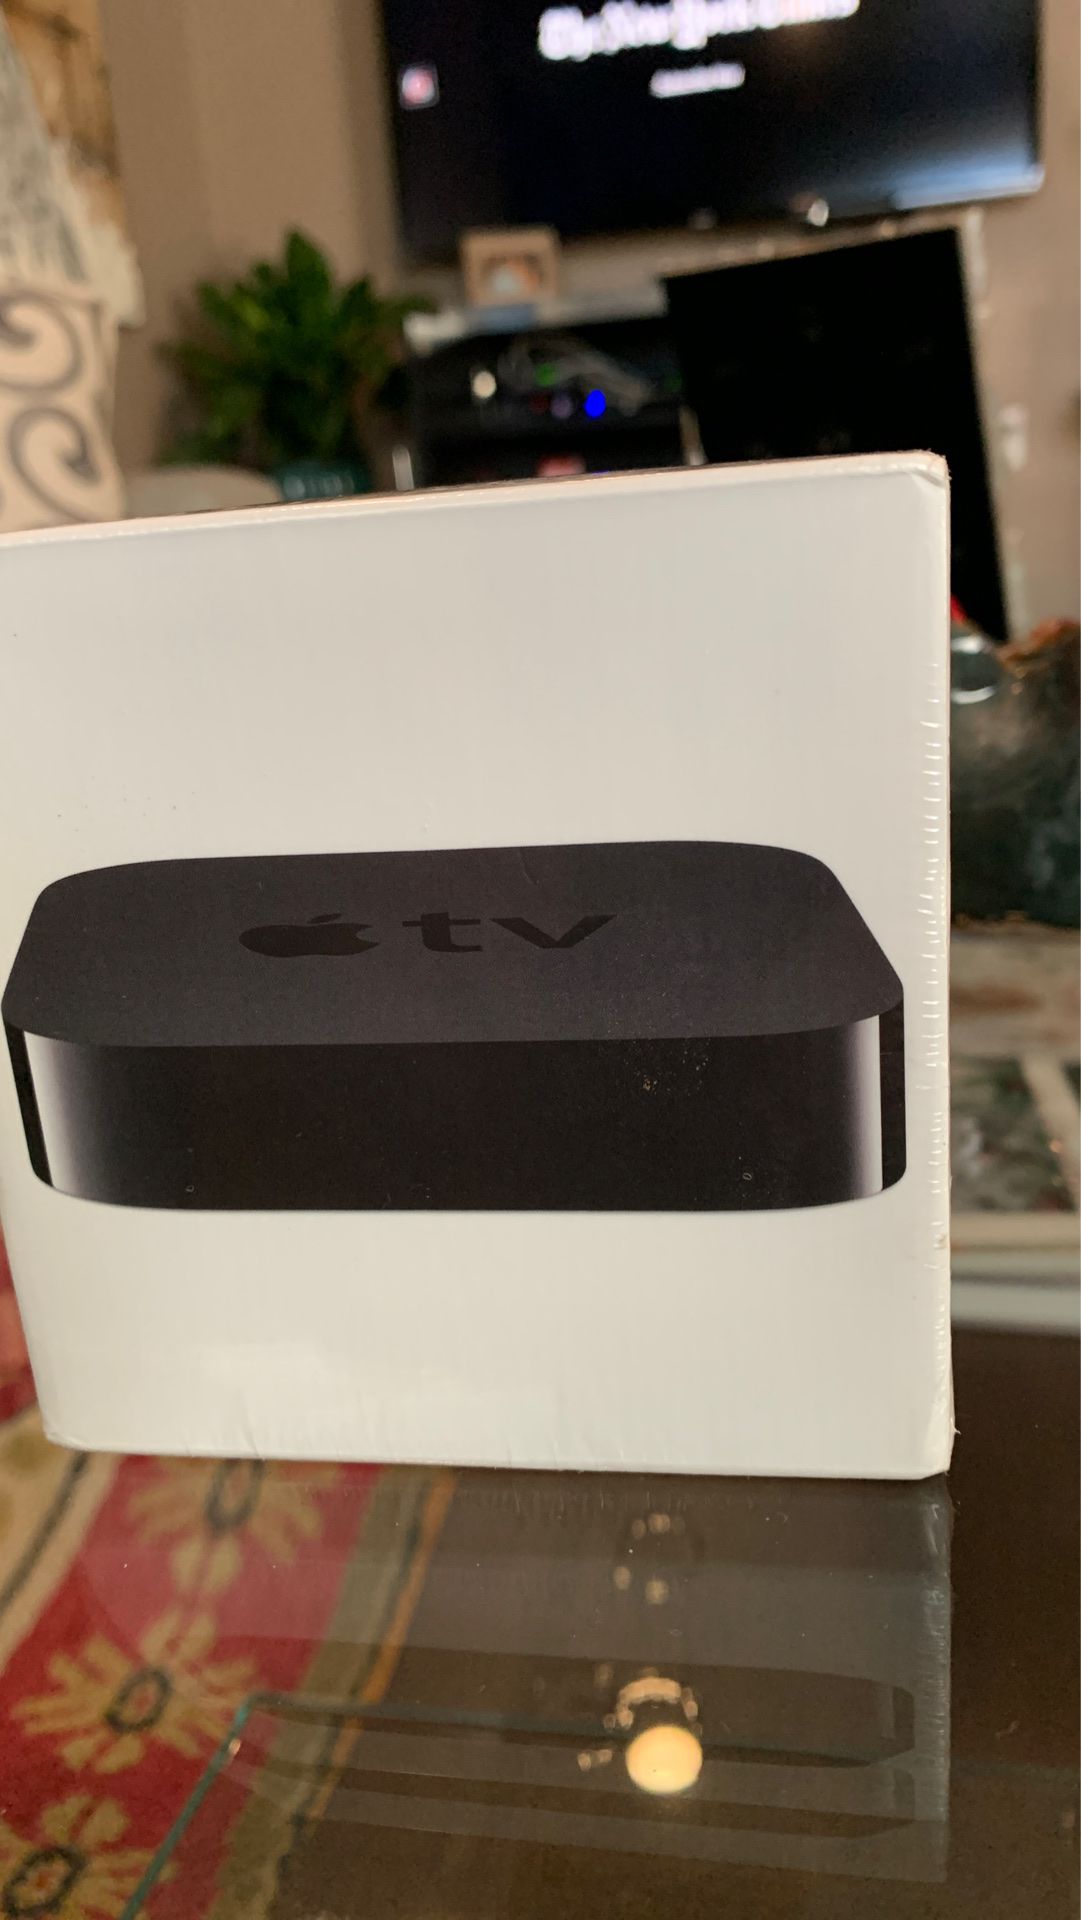 Second generation Apple TV bran new in the box